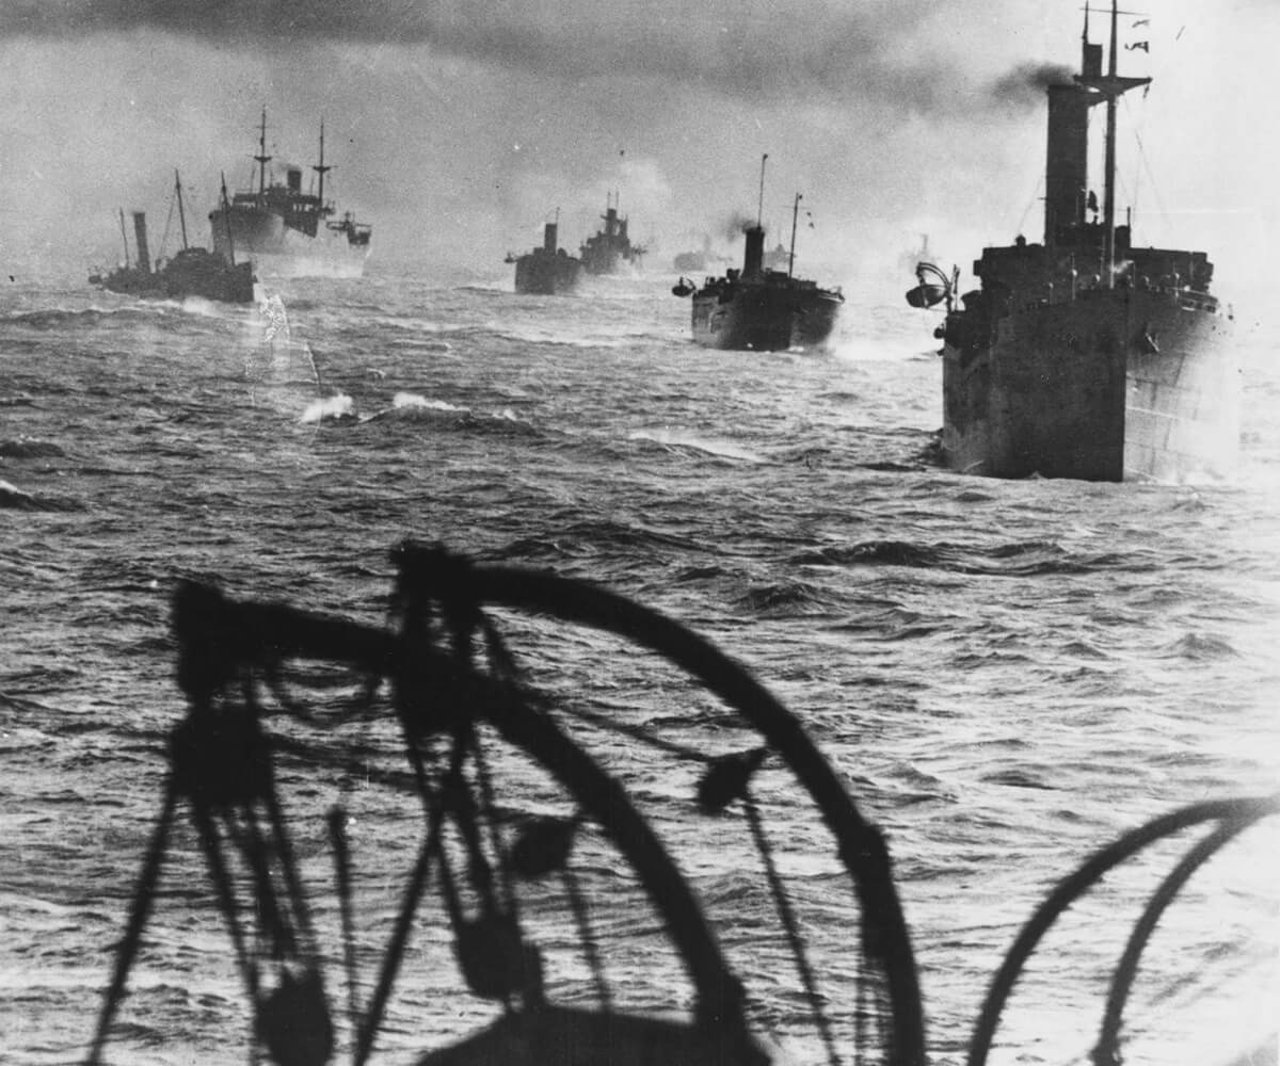 Black and white photo taking from a ship showing many war ships travelling in one direction.